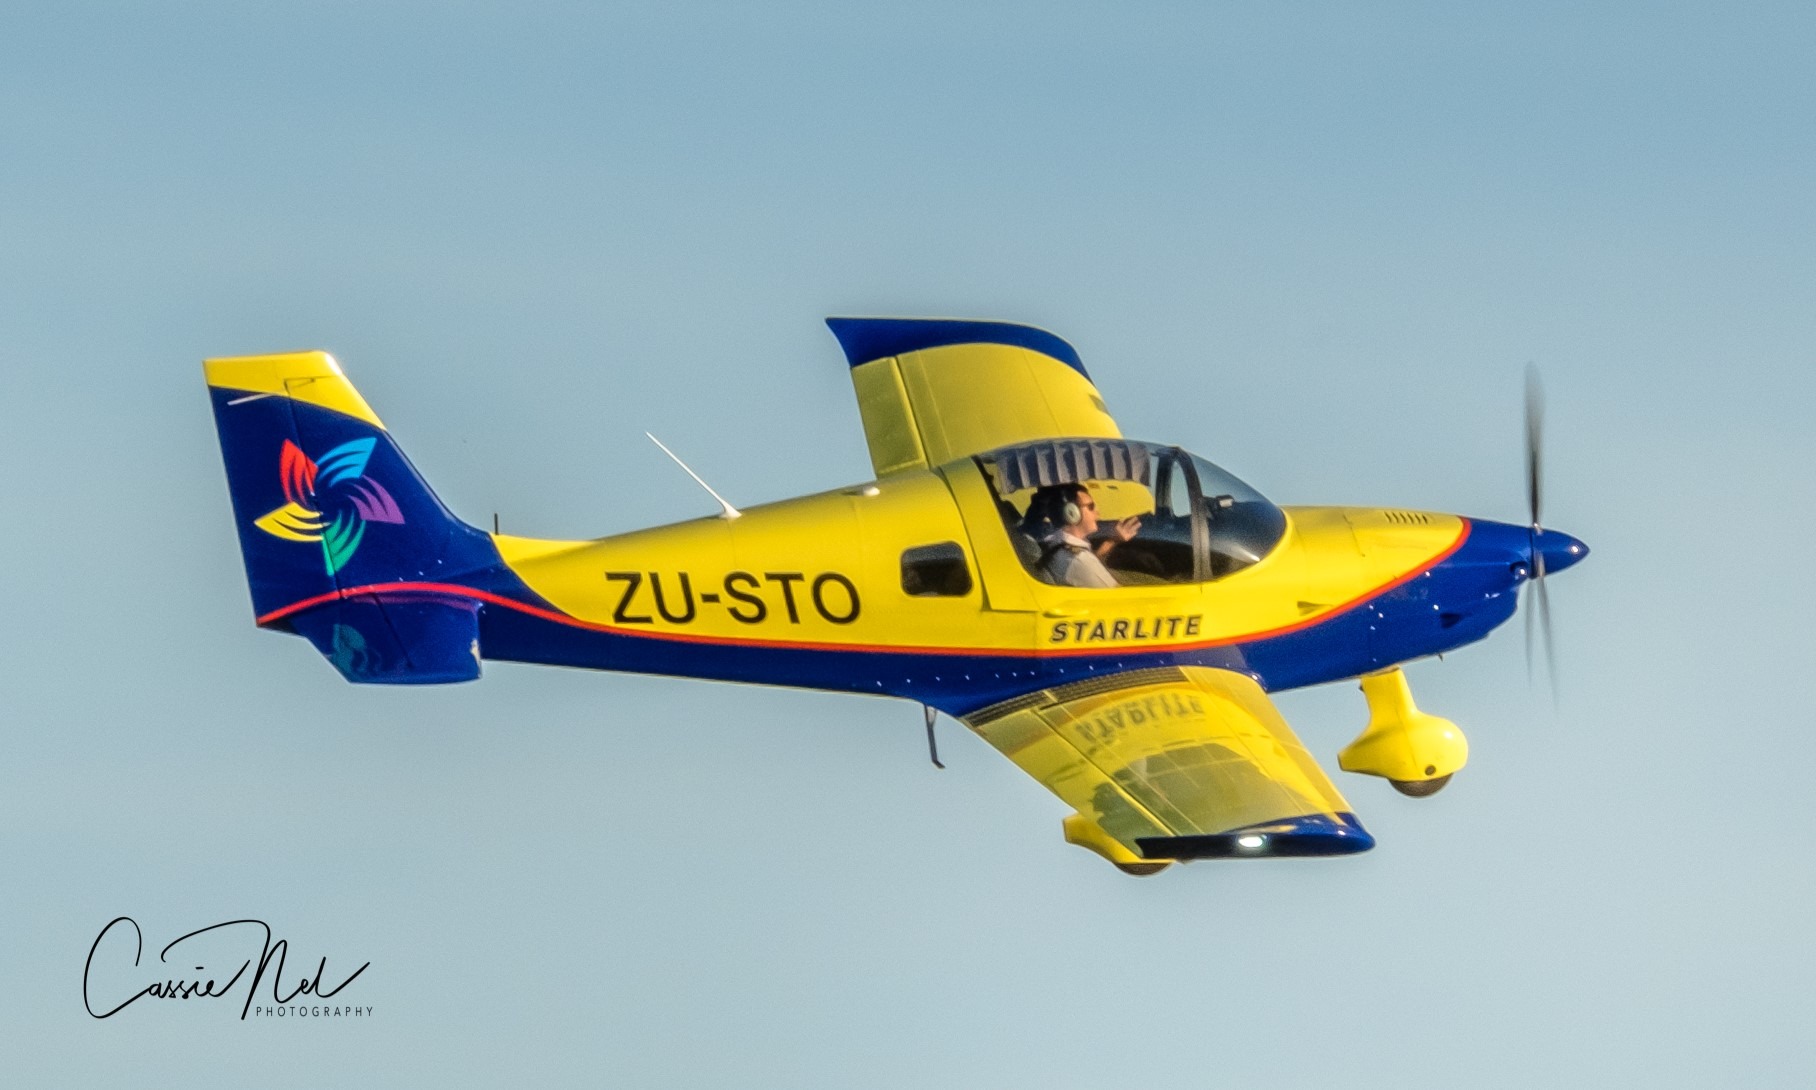 Sling 2: The Soul Of A Fighter - Plane & Pilot Magazine